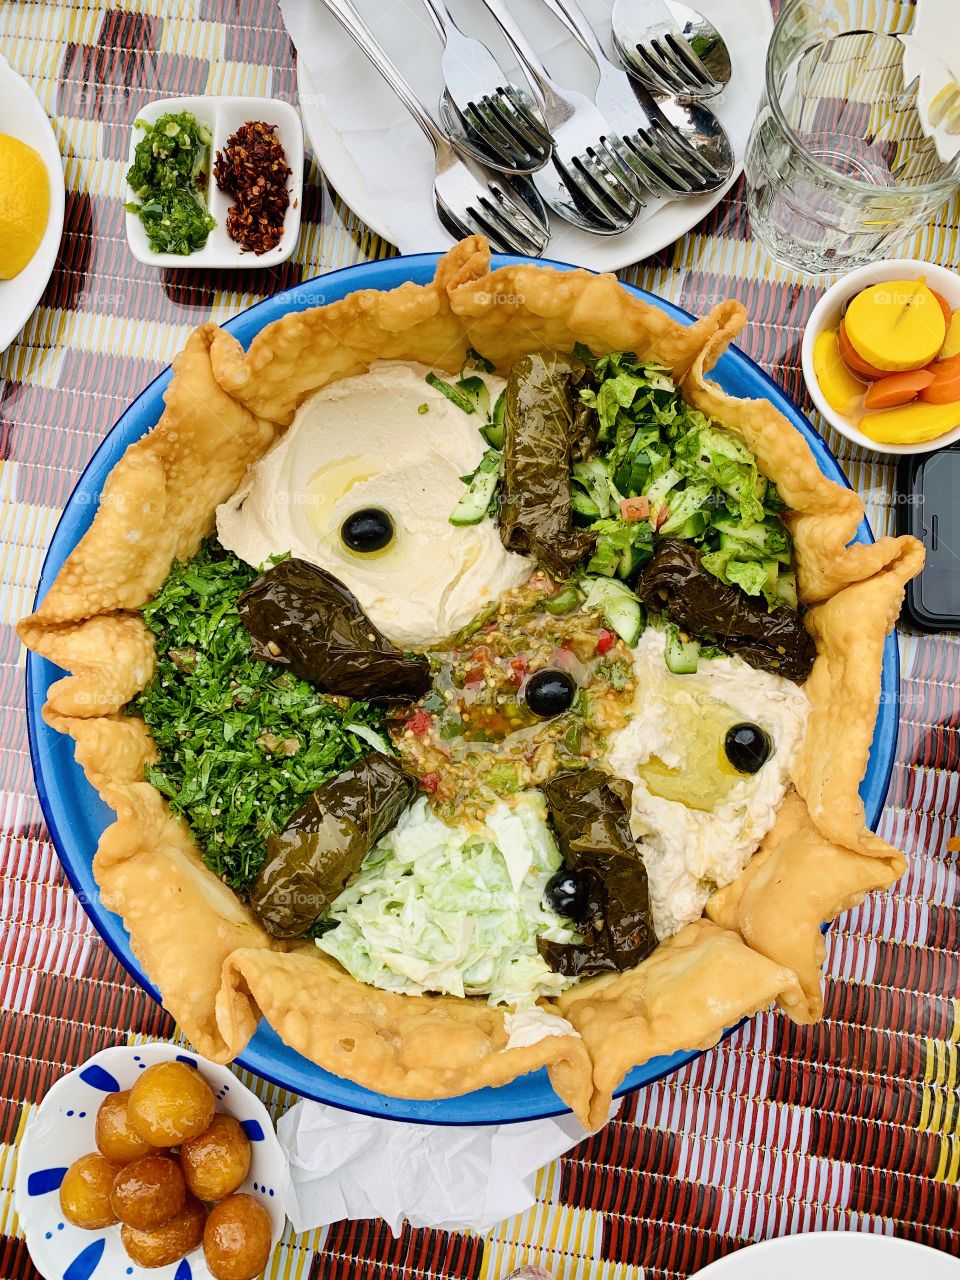 Mix of Arabic appetizers and salad in a crunchy bread with Arabic sweets and spoons